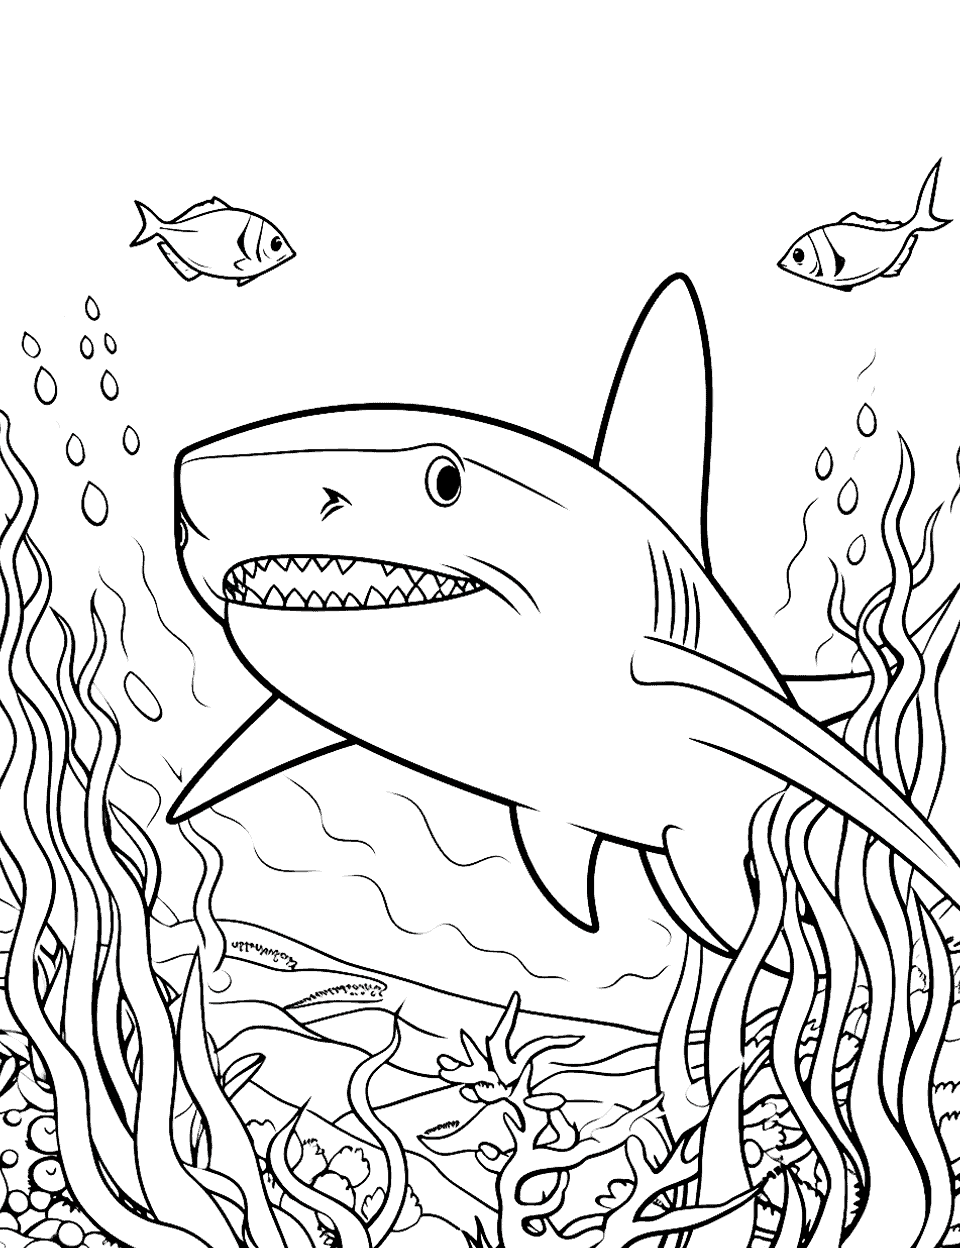 Reef Shark Amidst the Corals Coloring Page - A reef shark hiding among brightly colored coral reefs.